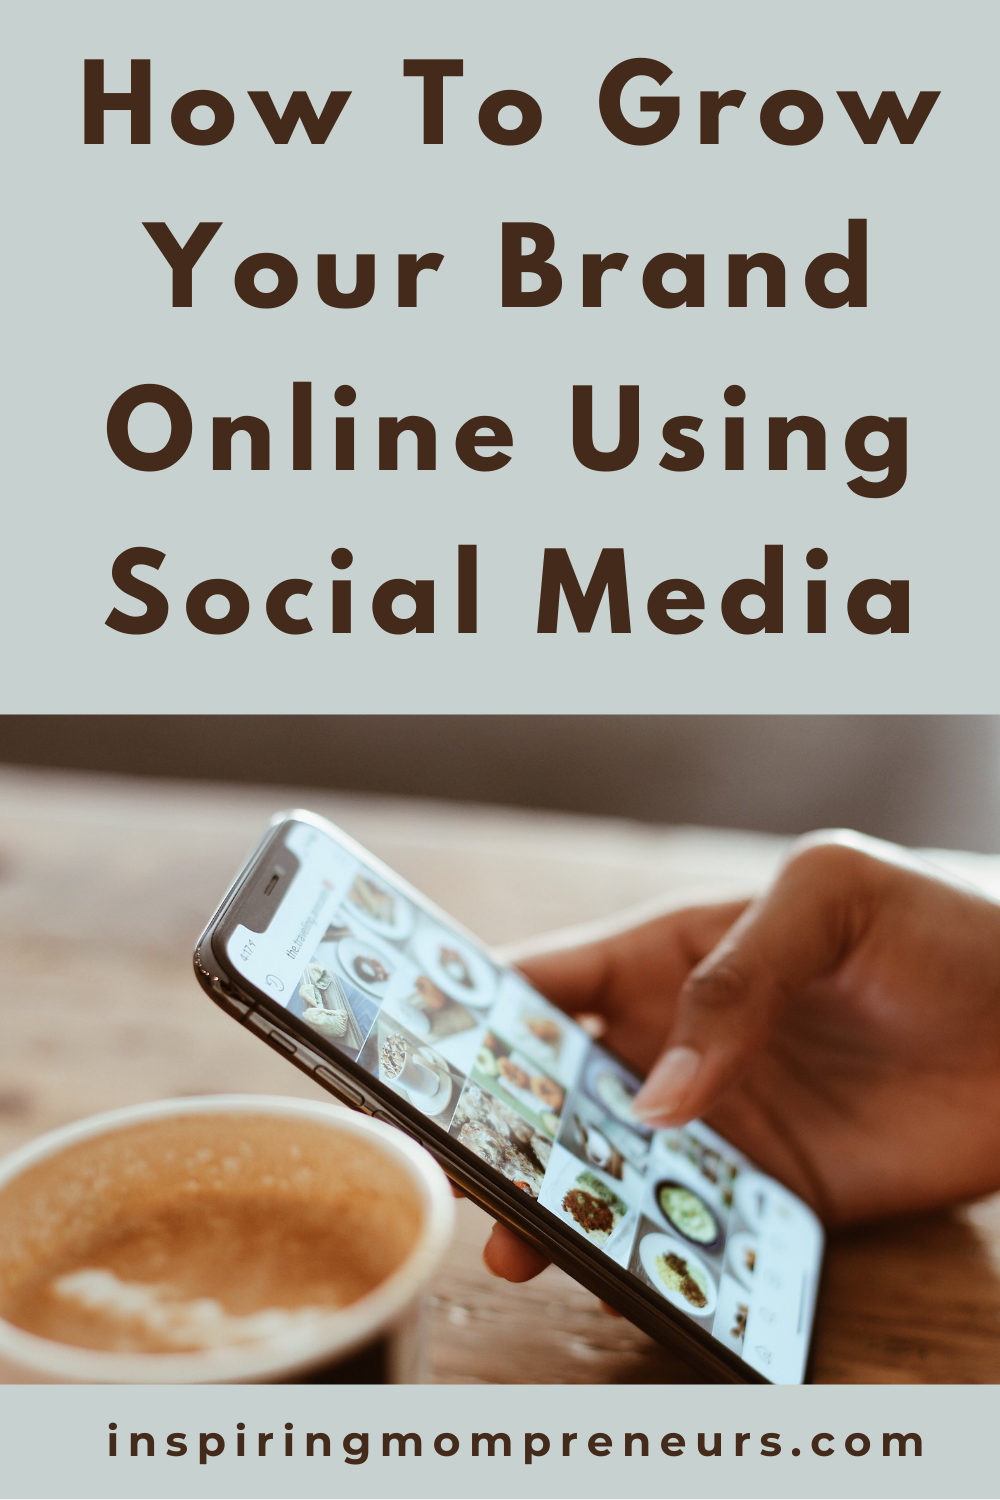 Small business owners are always looking for new ways to grow their audiences and boost their profits. Here's how to grow your brand online using social media.